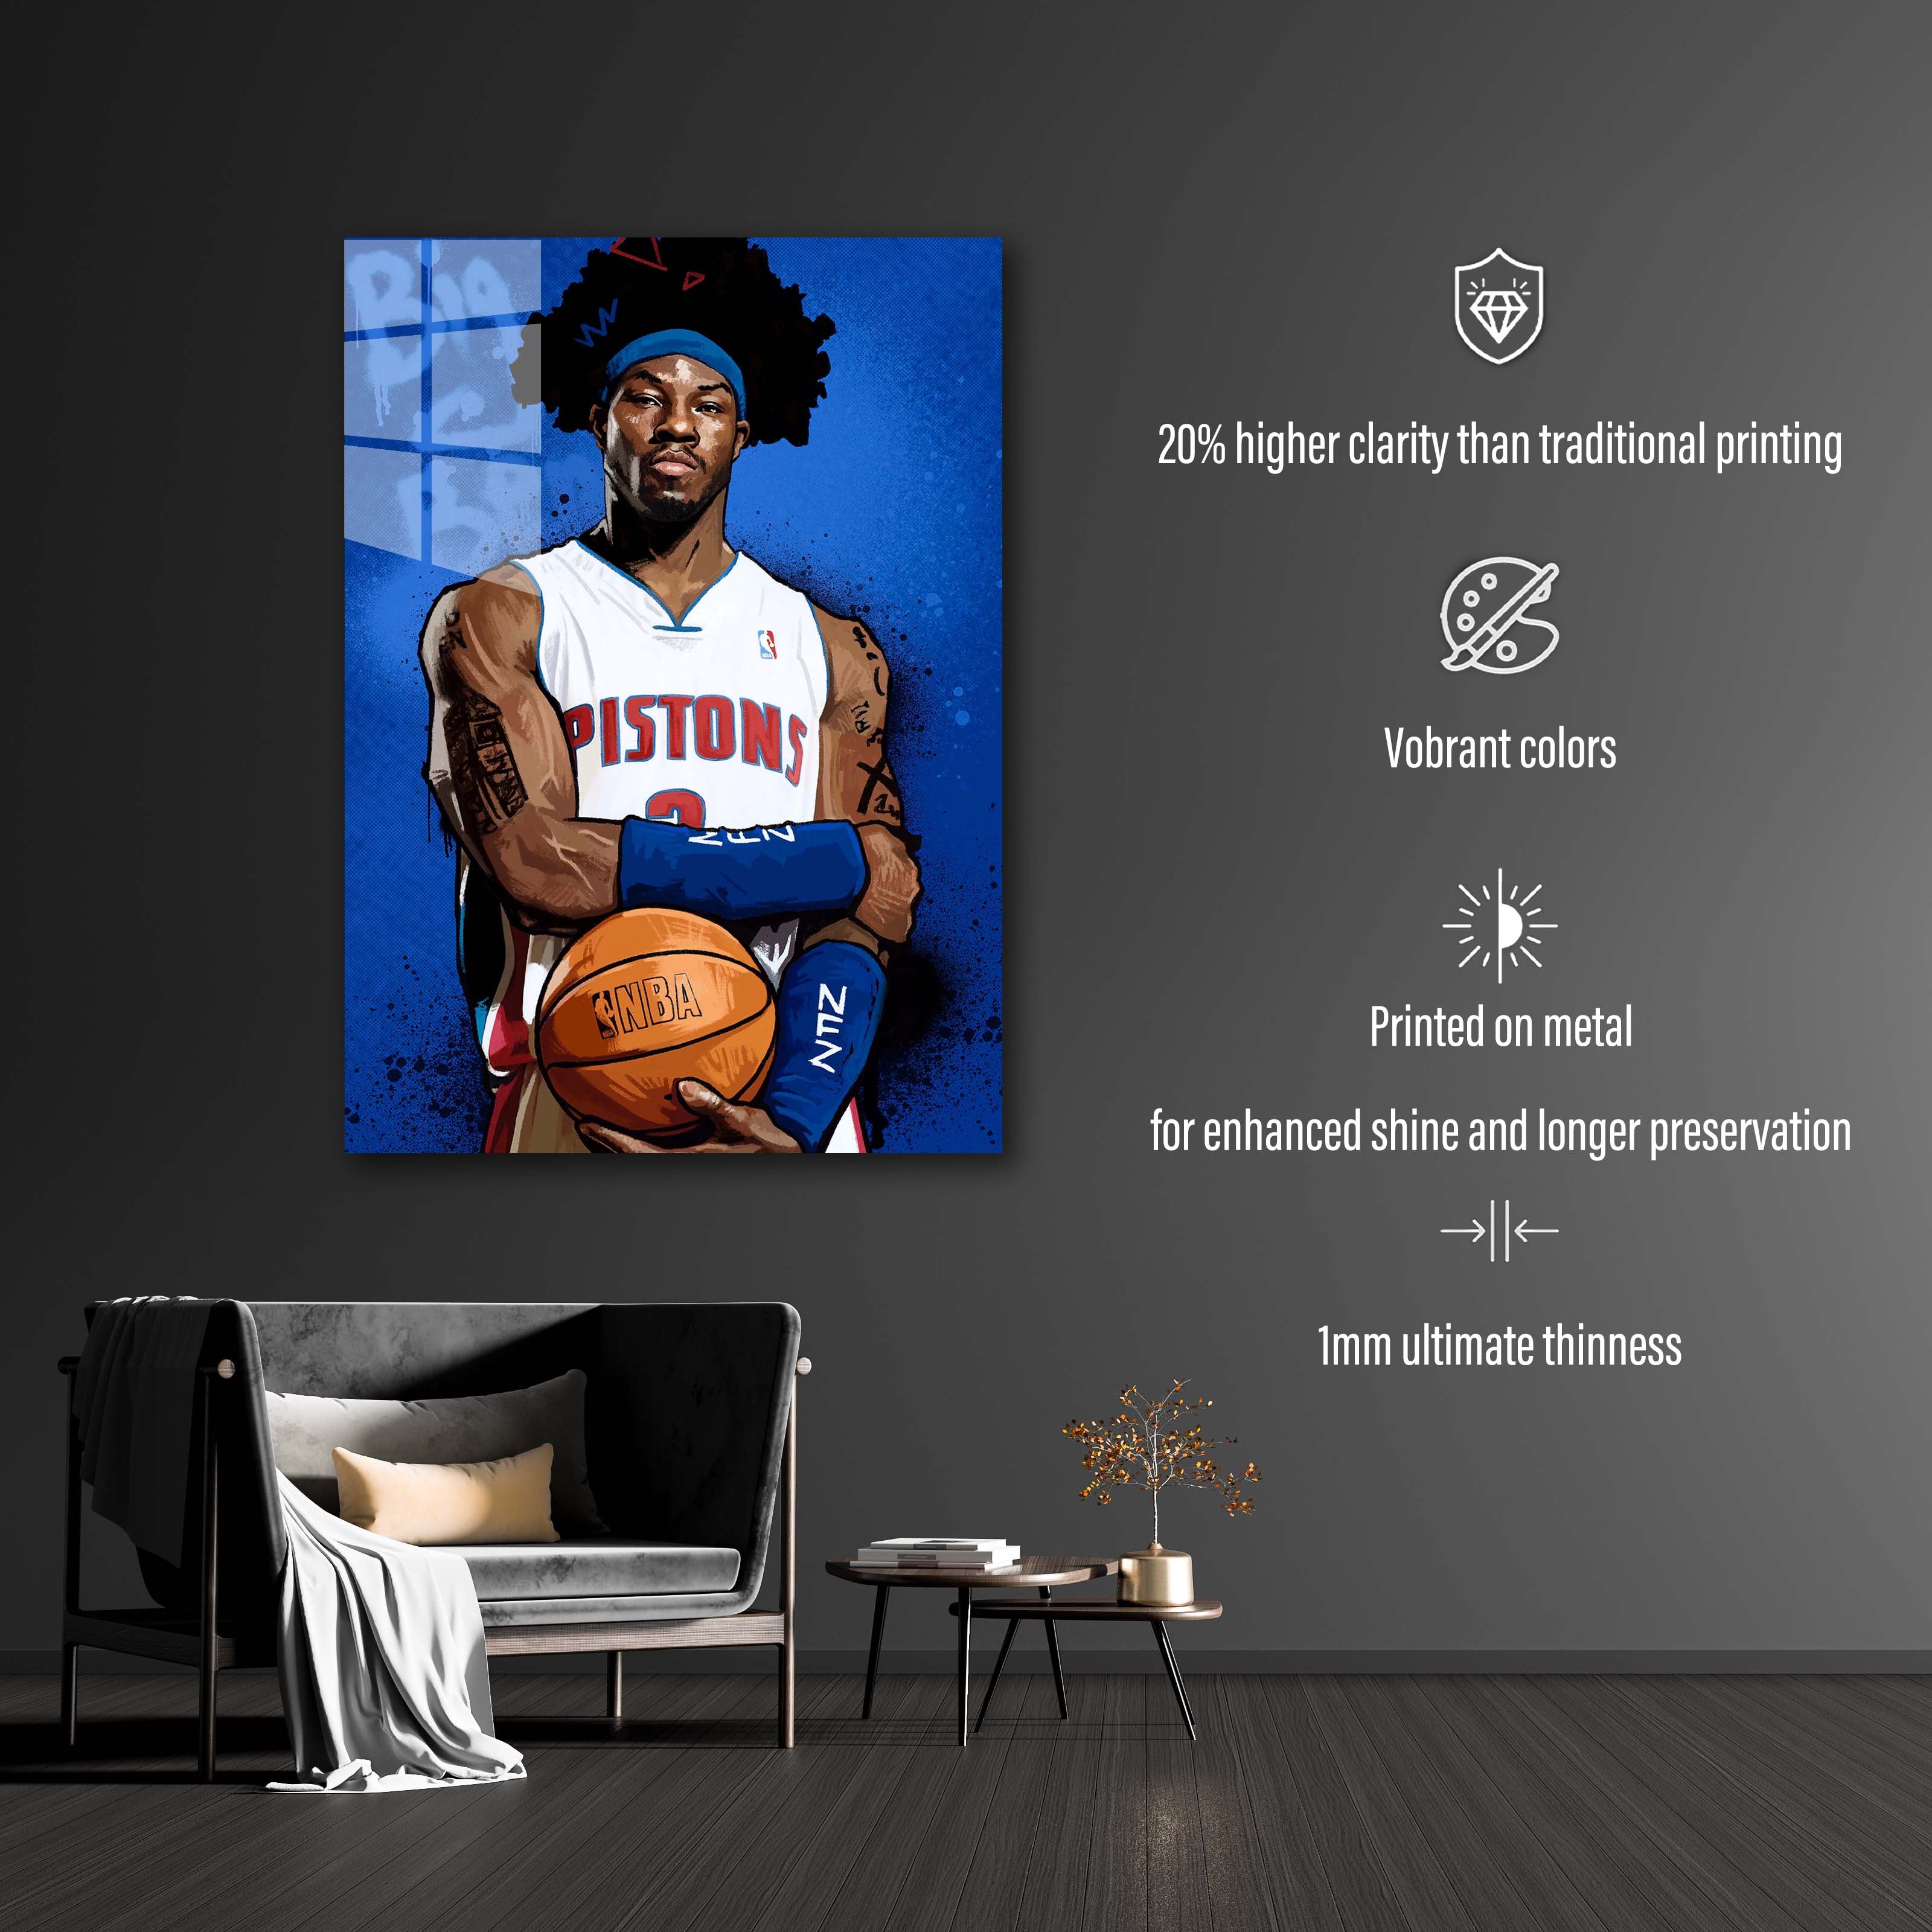 Ben Wallace-designed by @My Kido Art